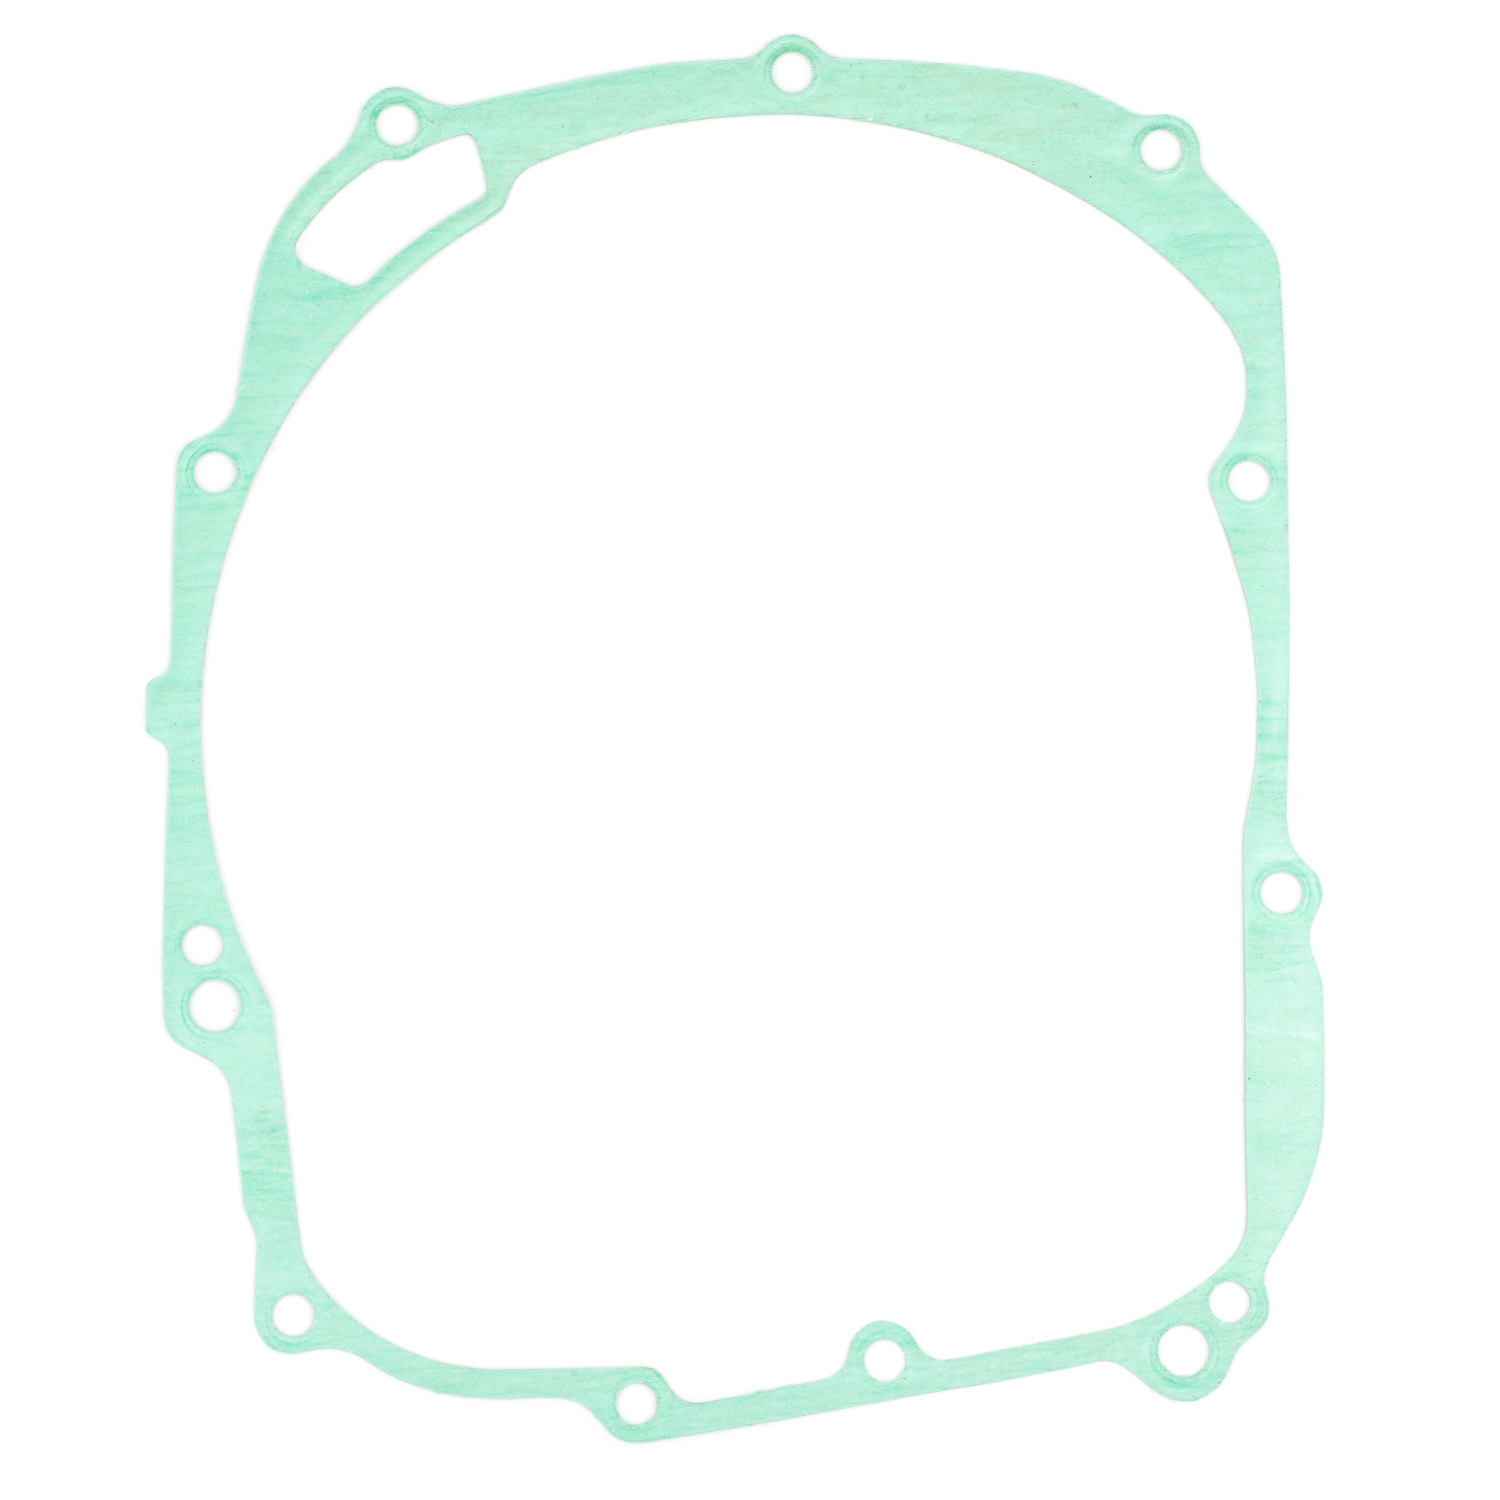 GTS1000 Clutch Cover Gasket